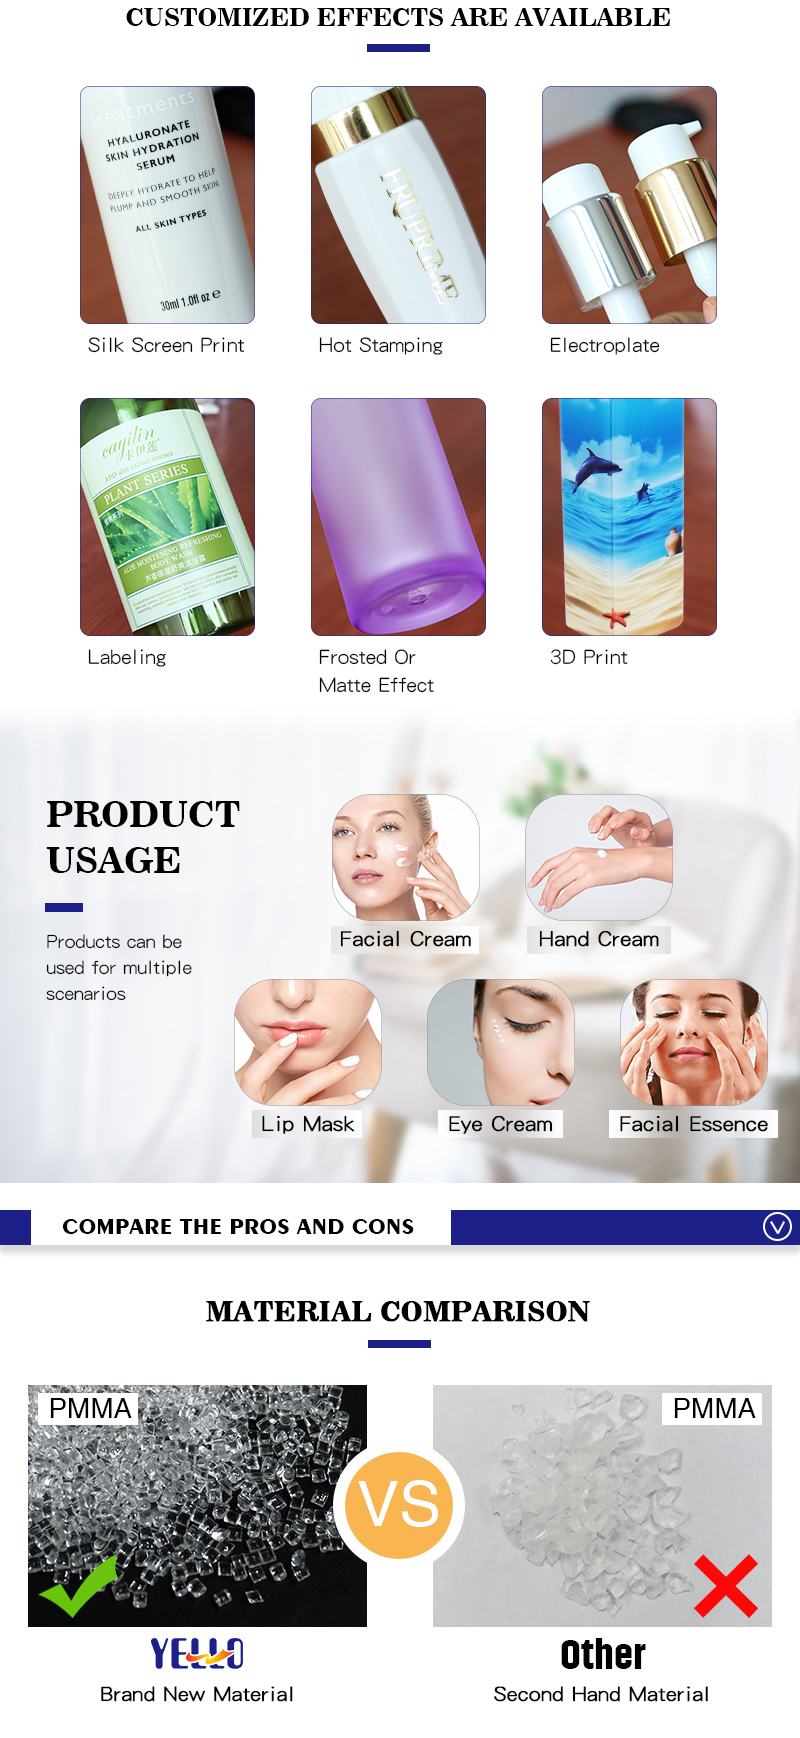 Shinny Fancy Acrylic Bottles For Lotion 30ml 60ml , Empty Plastic Skincare Packaging Wholesale